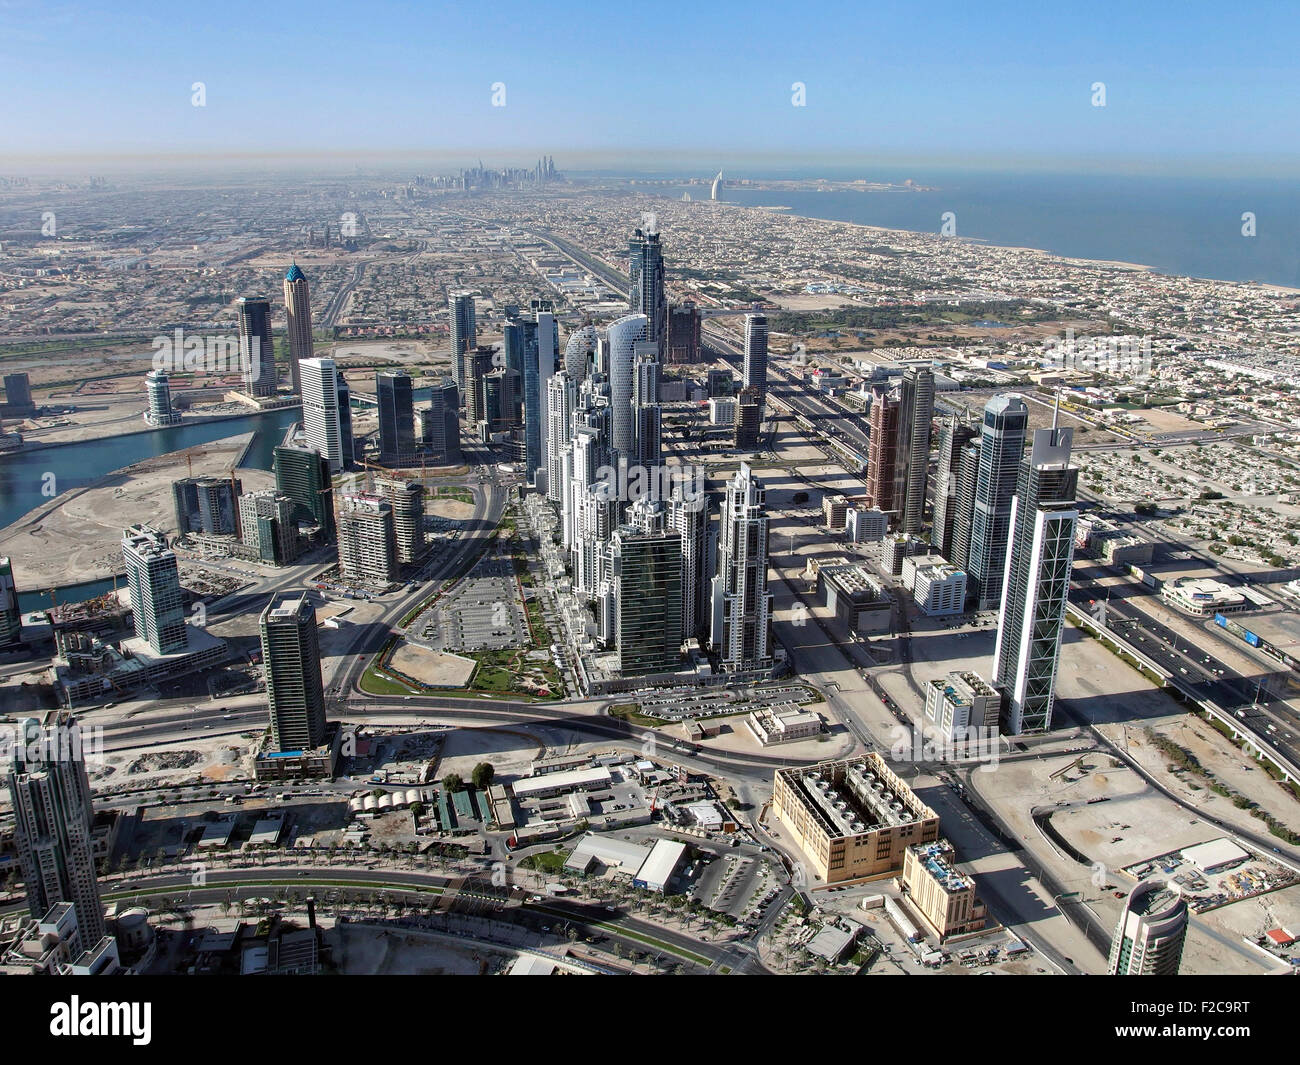 Downtown Financial district seen from the 124th floor of the Burj Khalifa tower a megatall skyscraper in Dubai, United Arab Emirates. Stock Photo